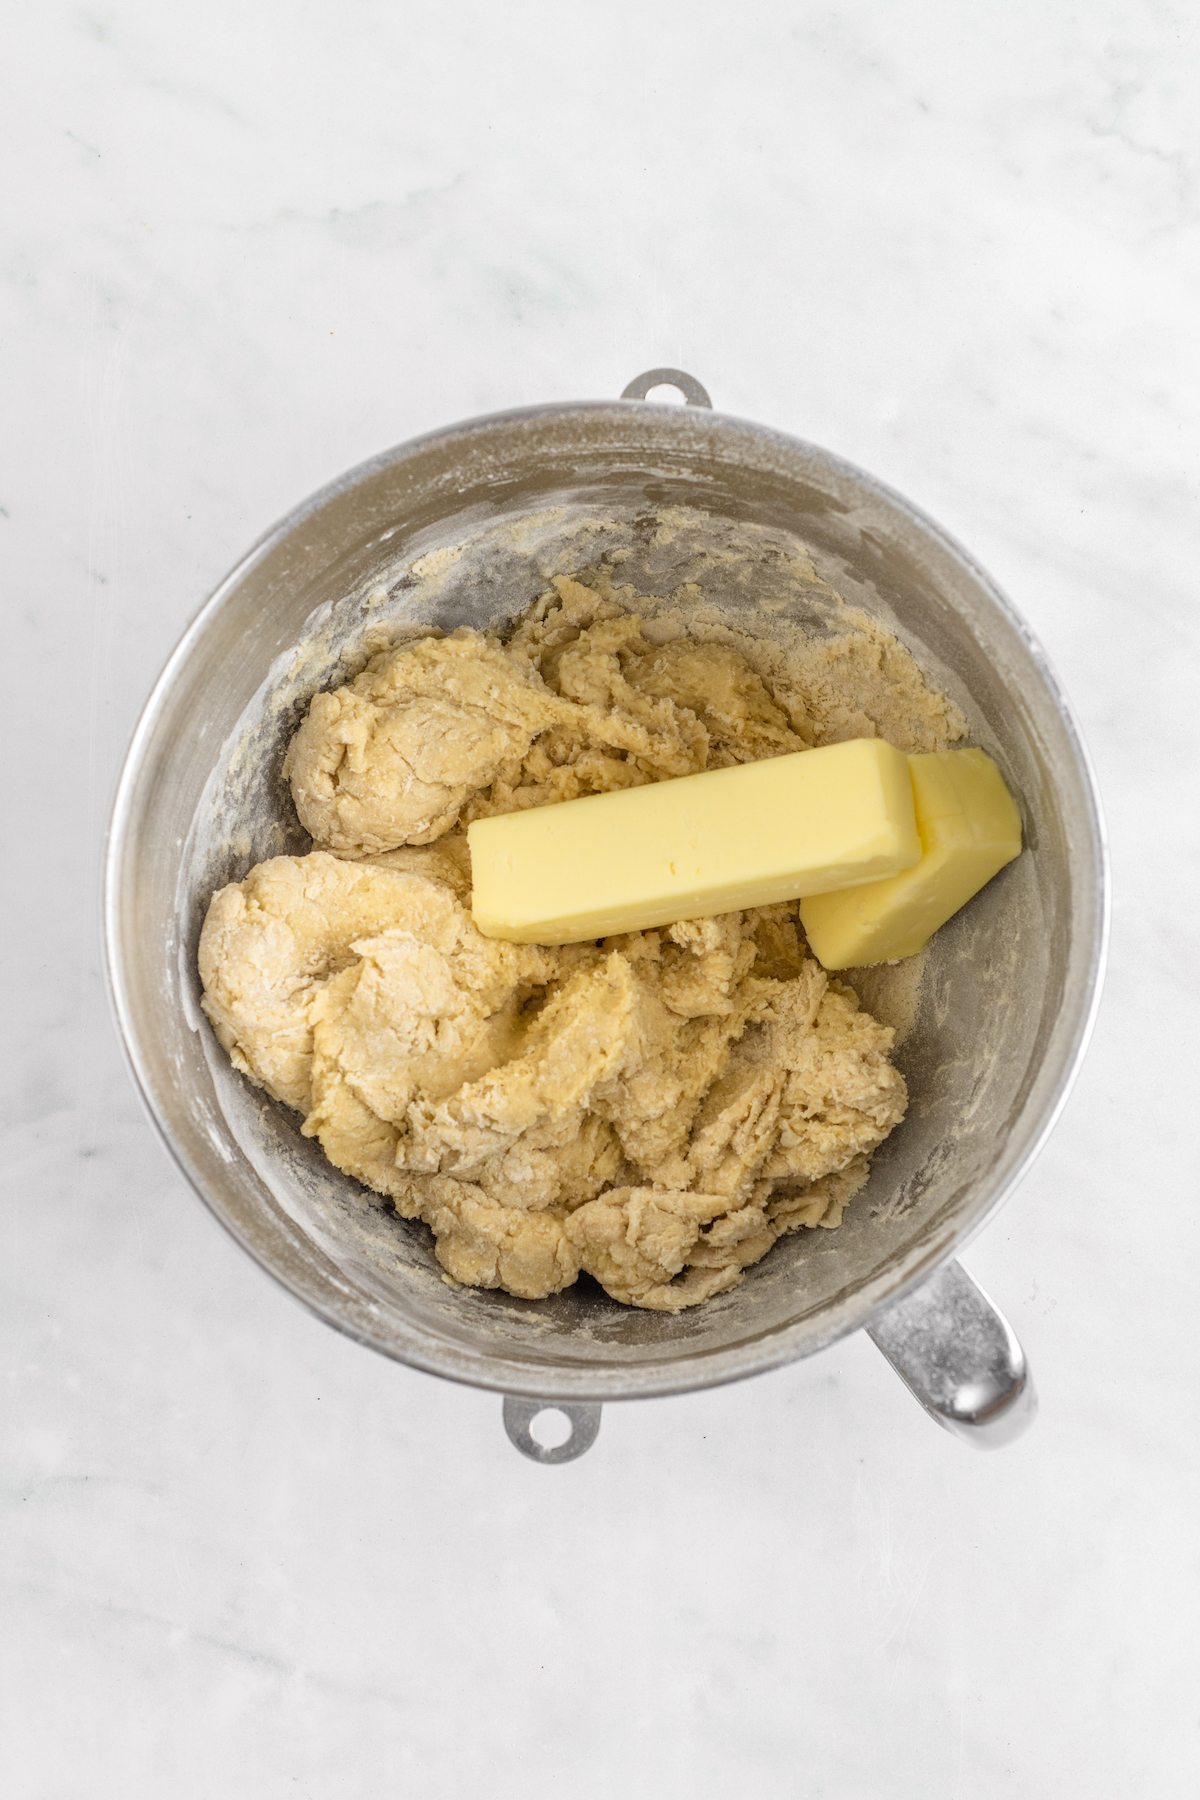 Butter added to a soft dough in a mixing bowl.